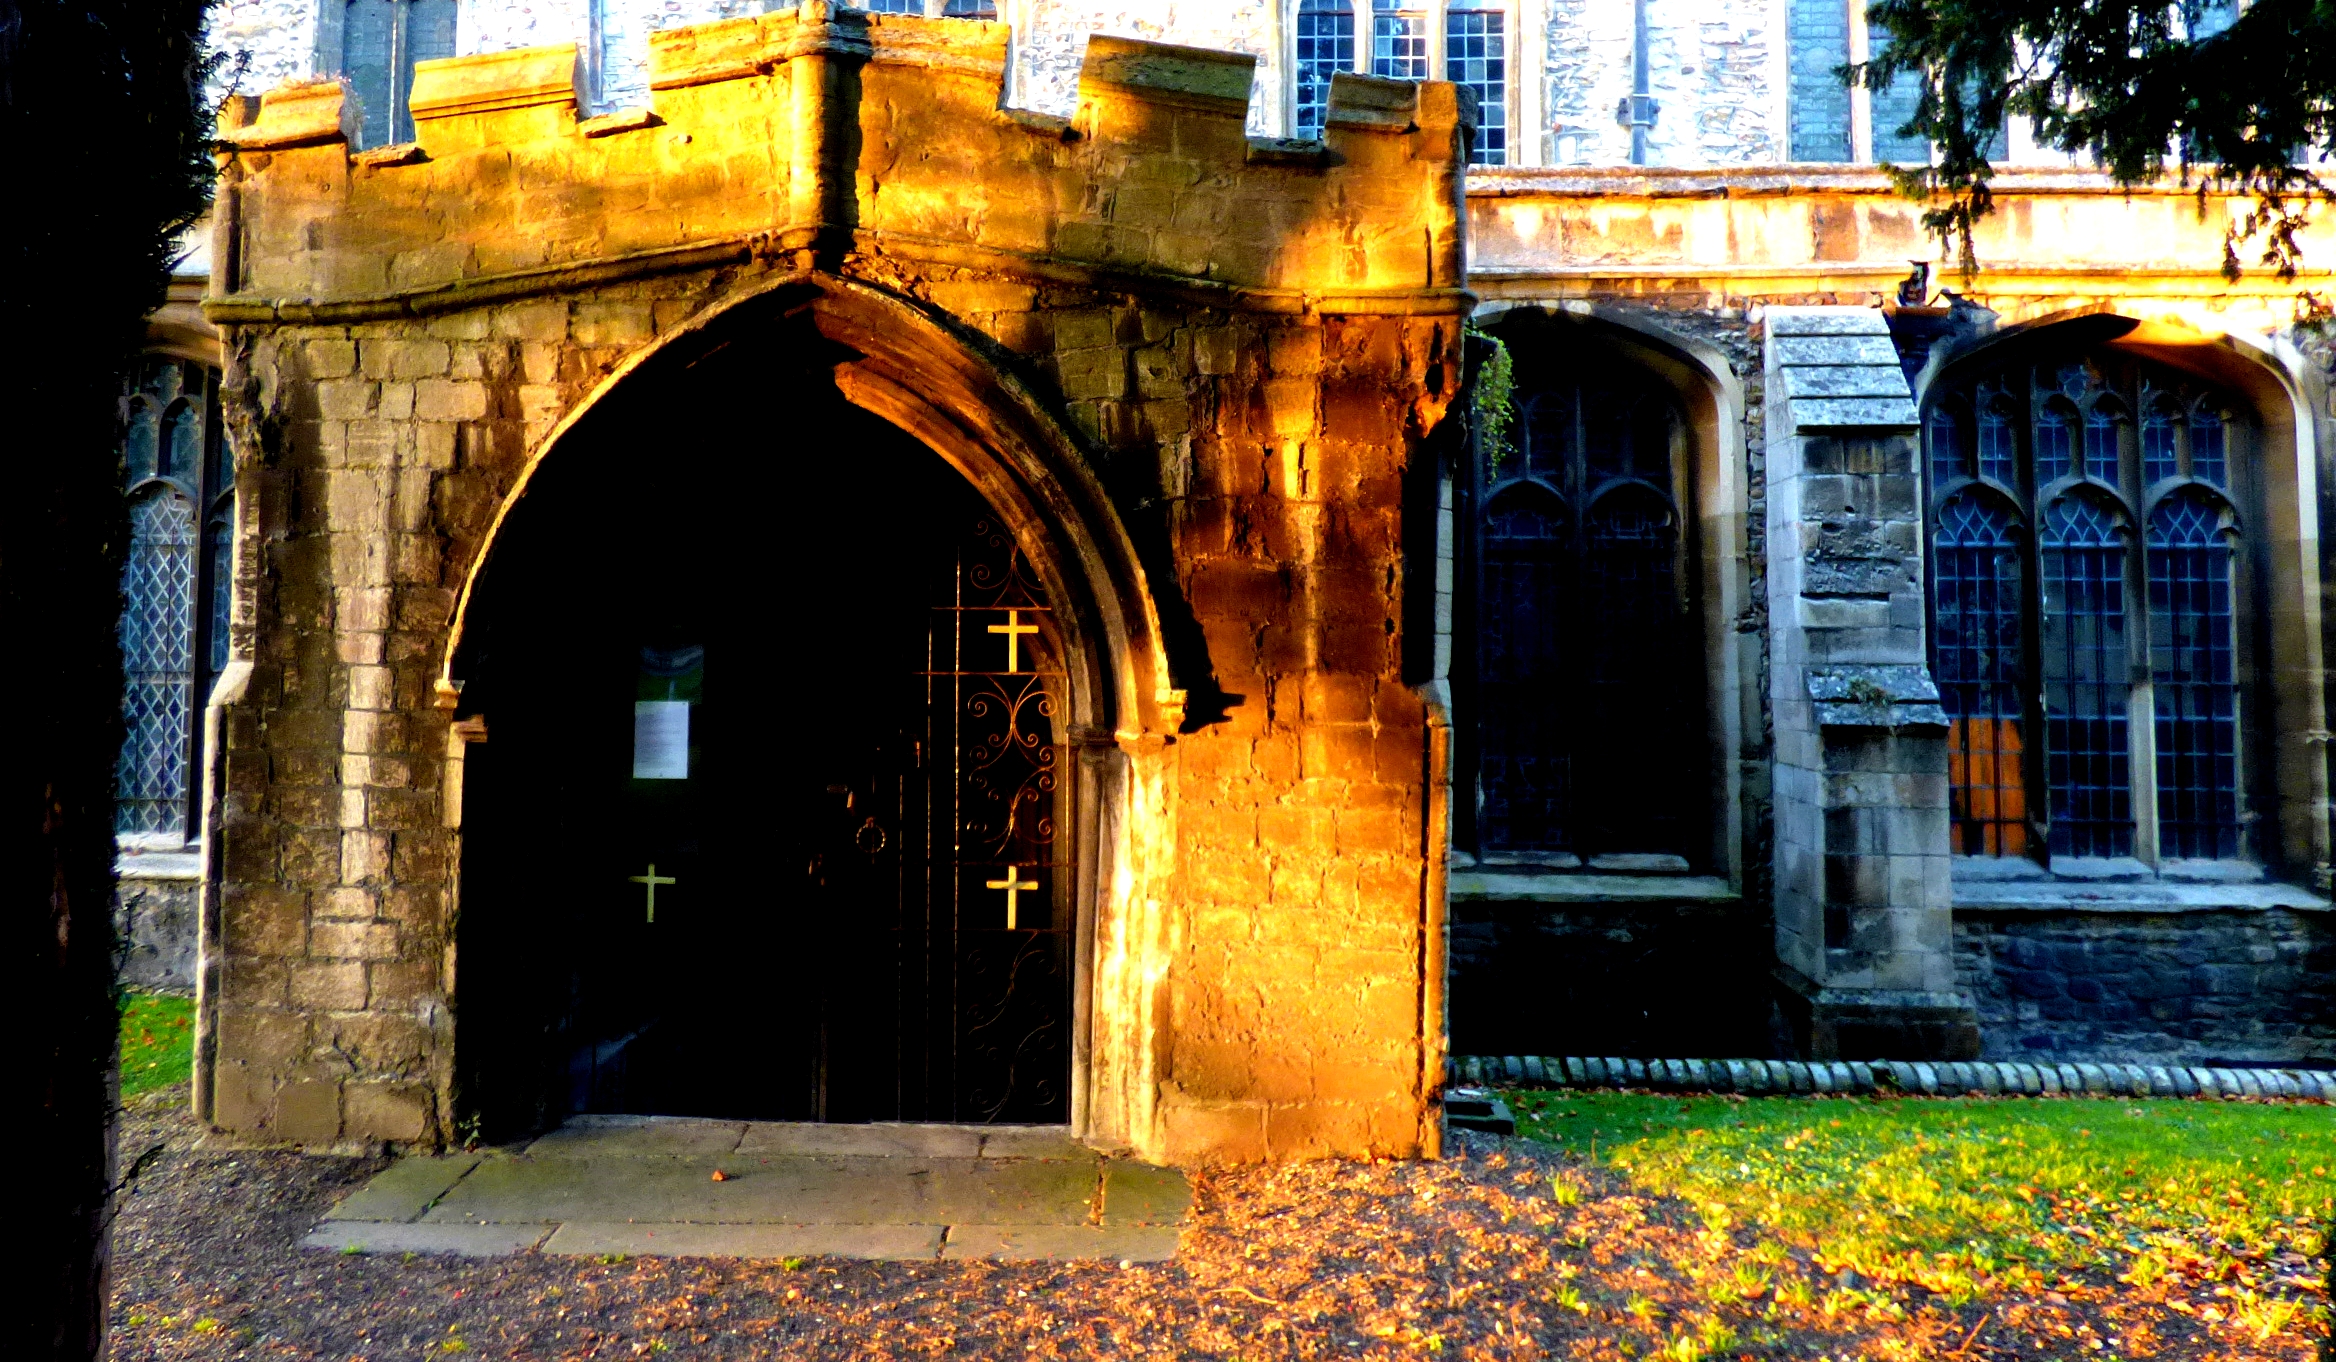 a gothic - style entrance to the main entrance of an old building